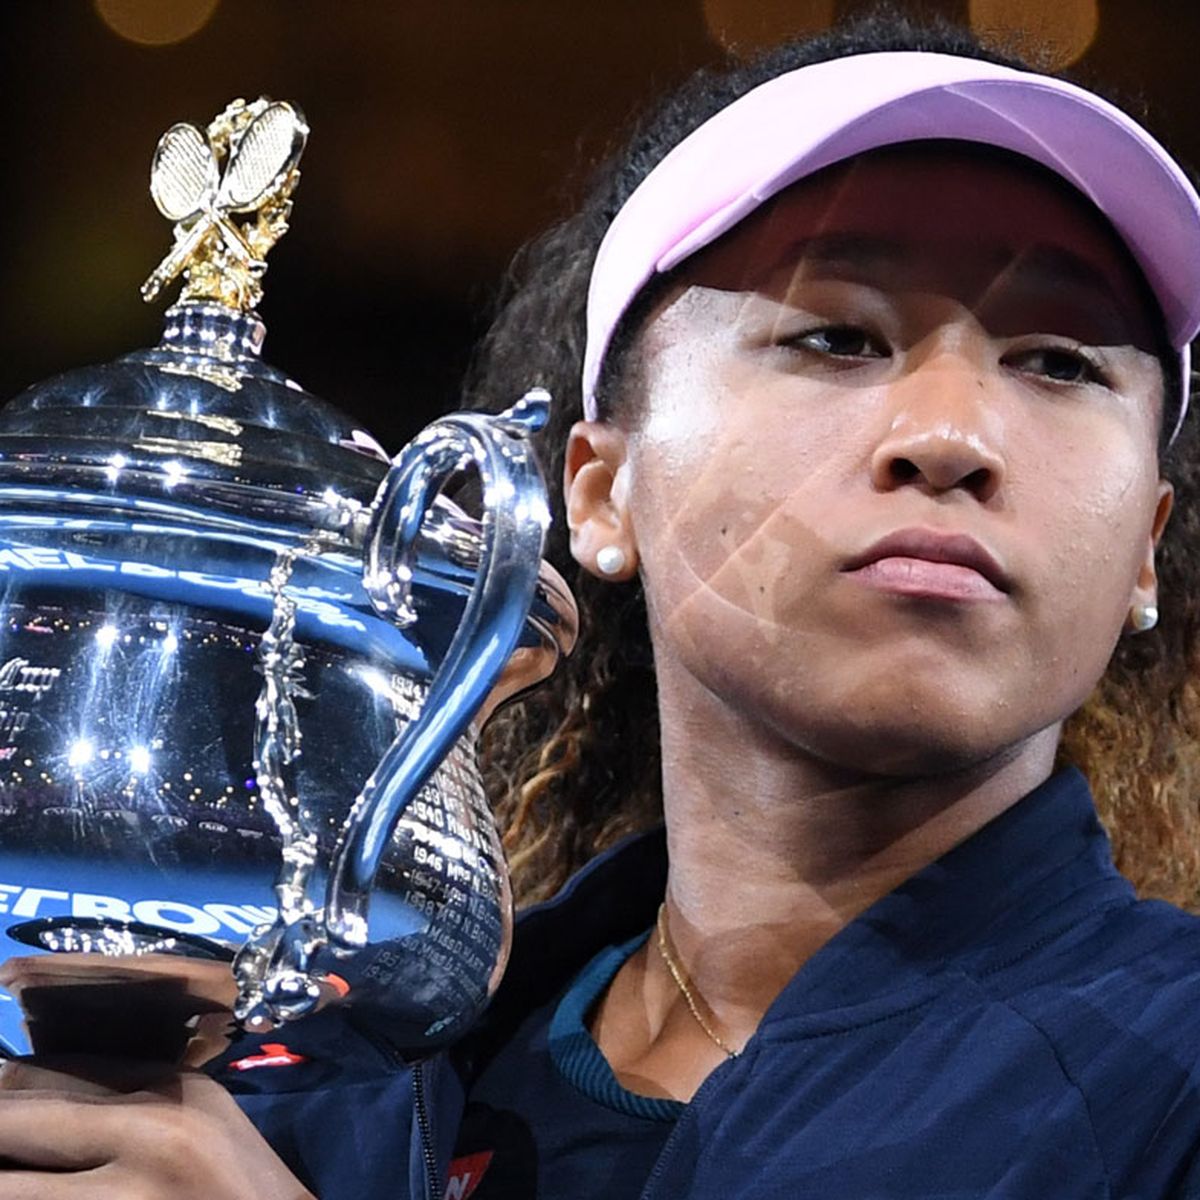 Nike and Shiseido offer very different depictions of Naomi Osaka, The Work